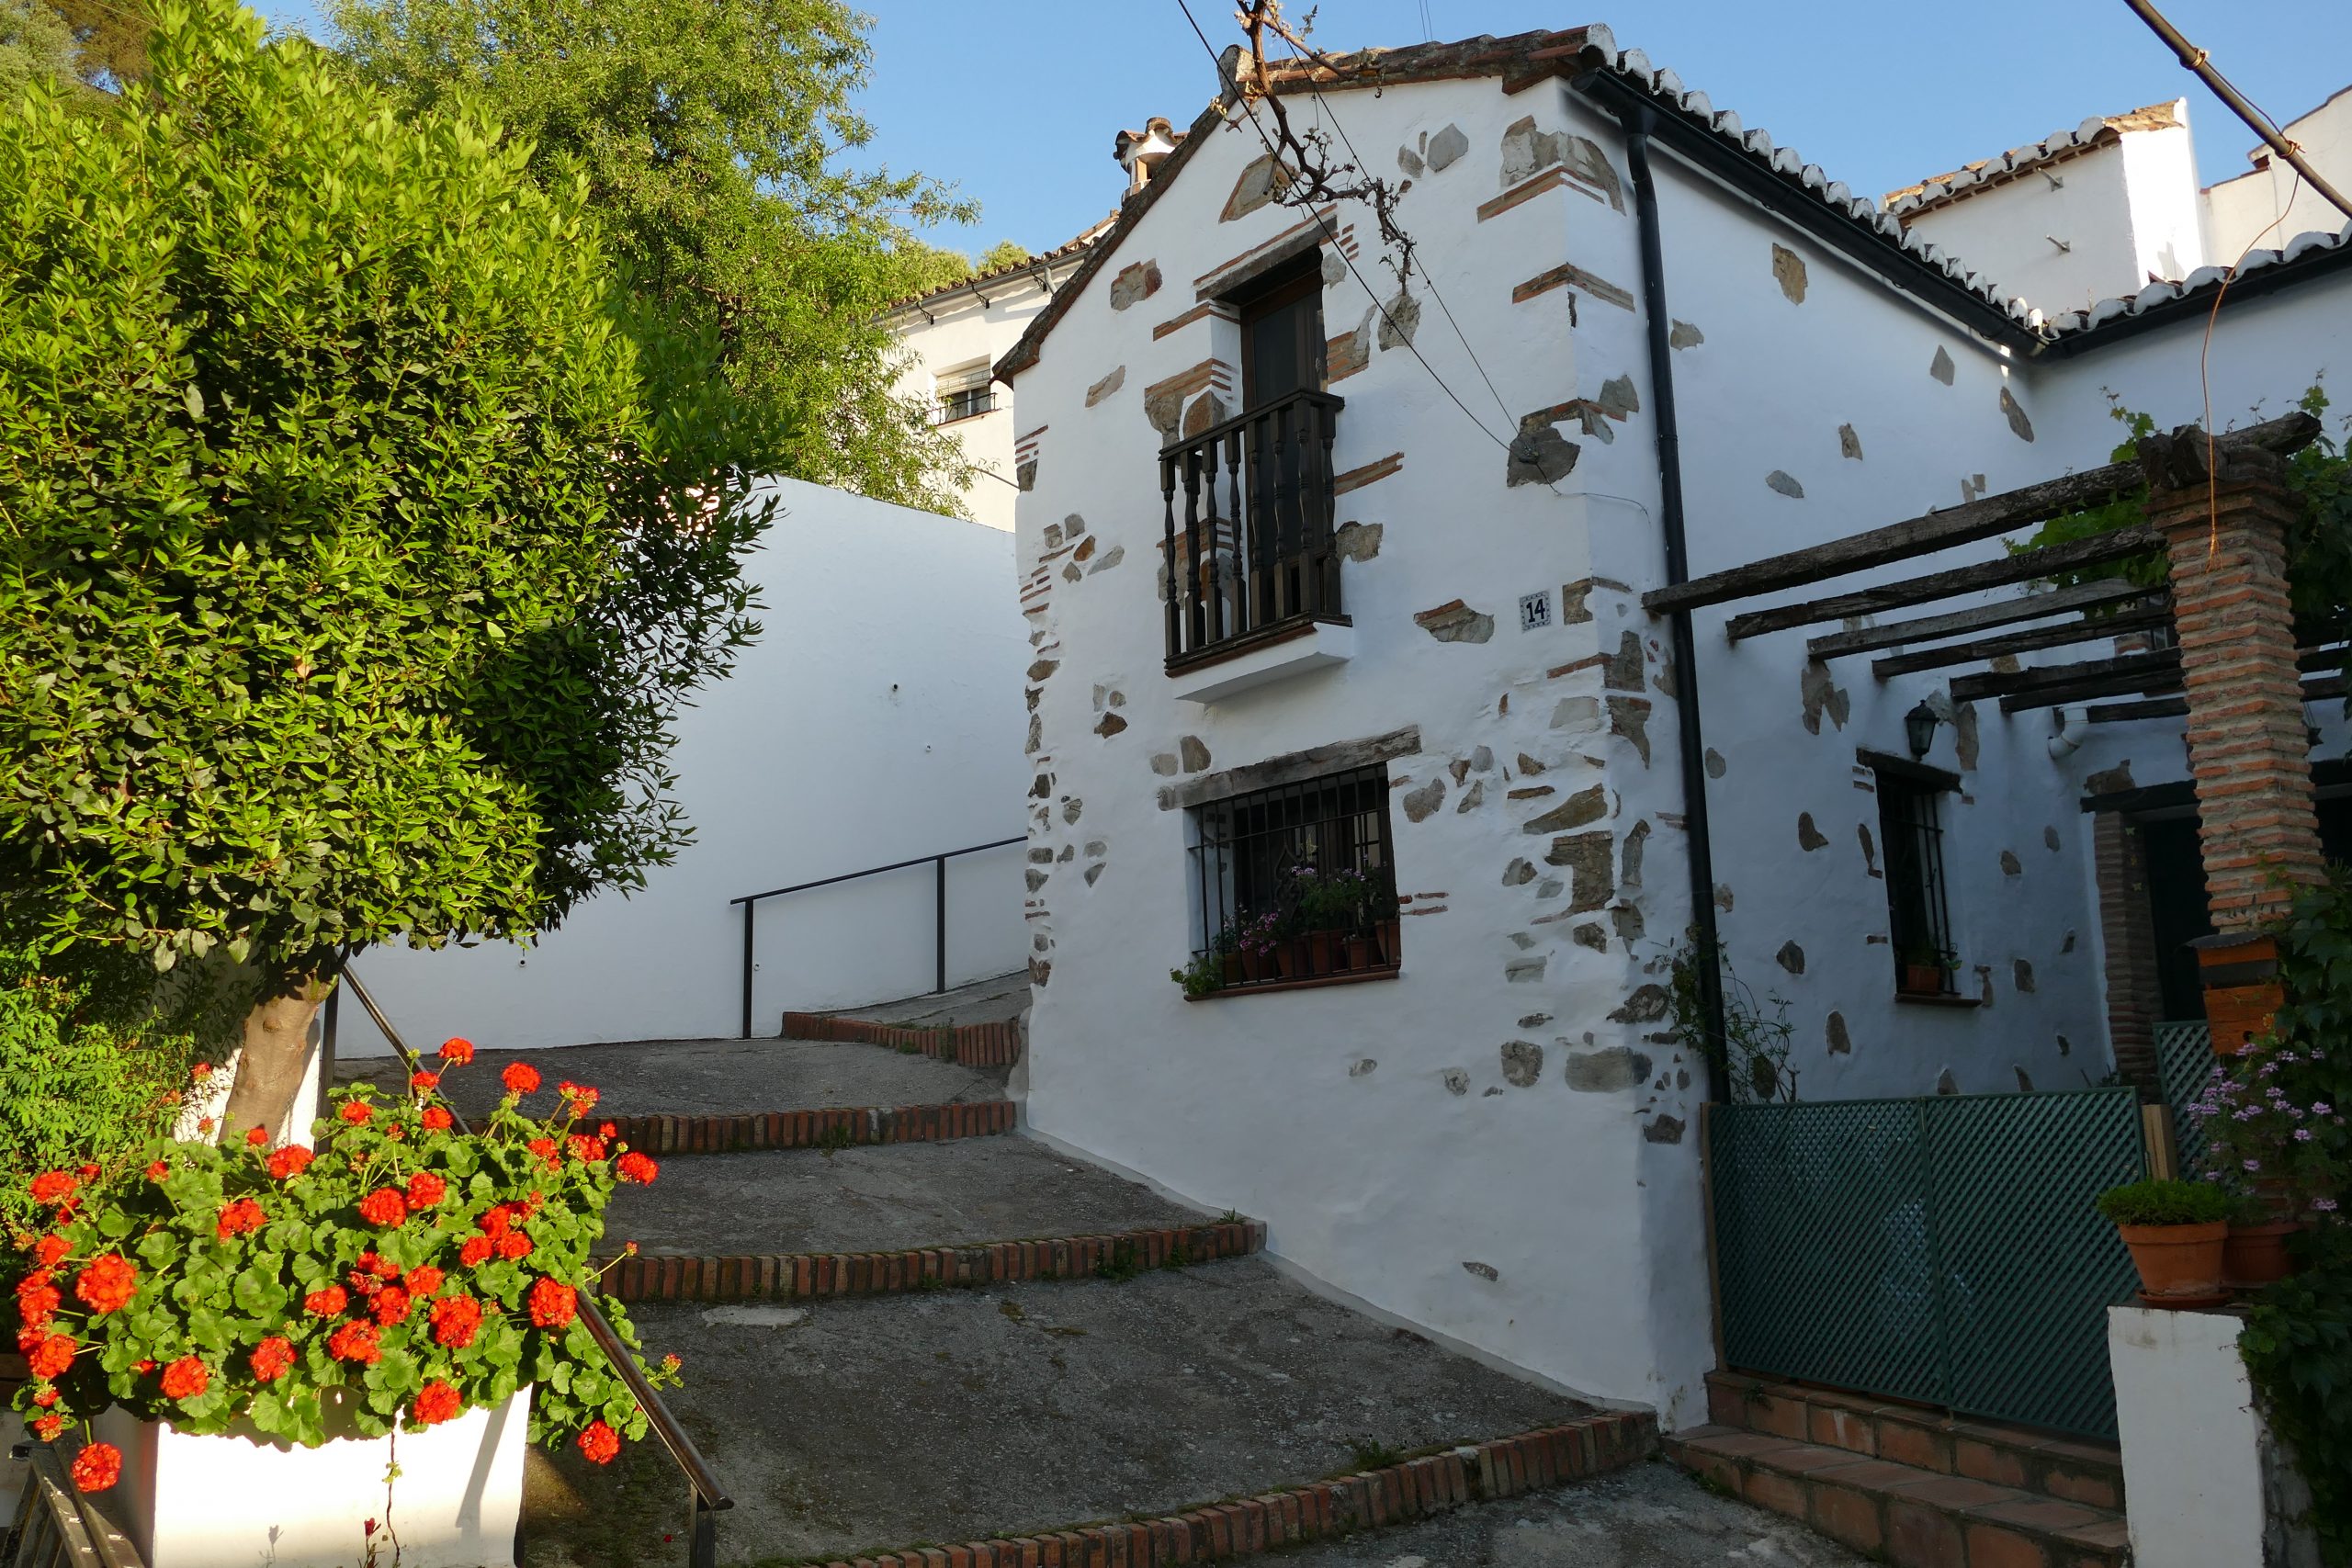 A typical house in an Andalusian white village ('pueblo blanco')